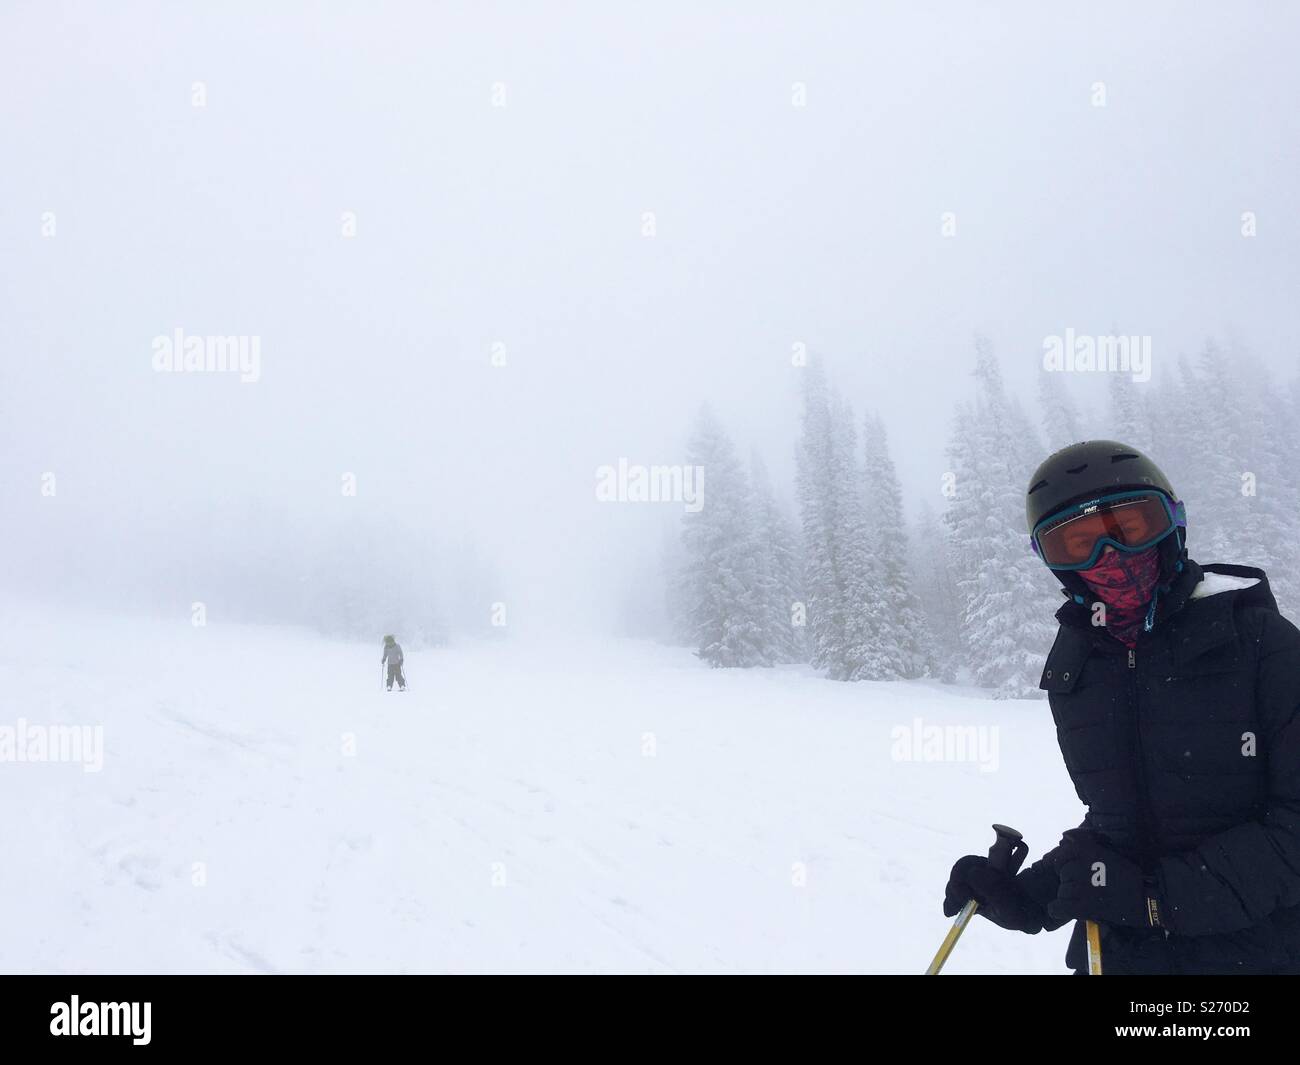 Two girls skiing in heavy snow, Steamboat Springs, Colorado. Stock Photo